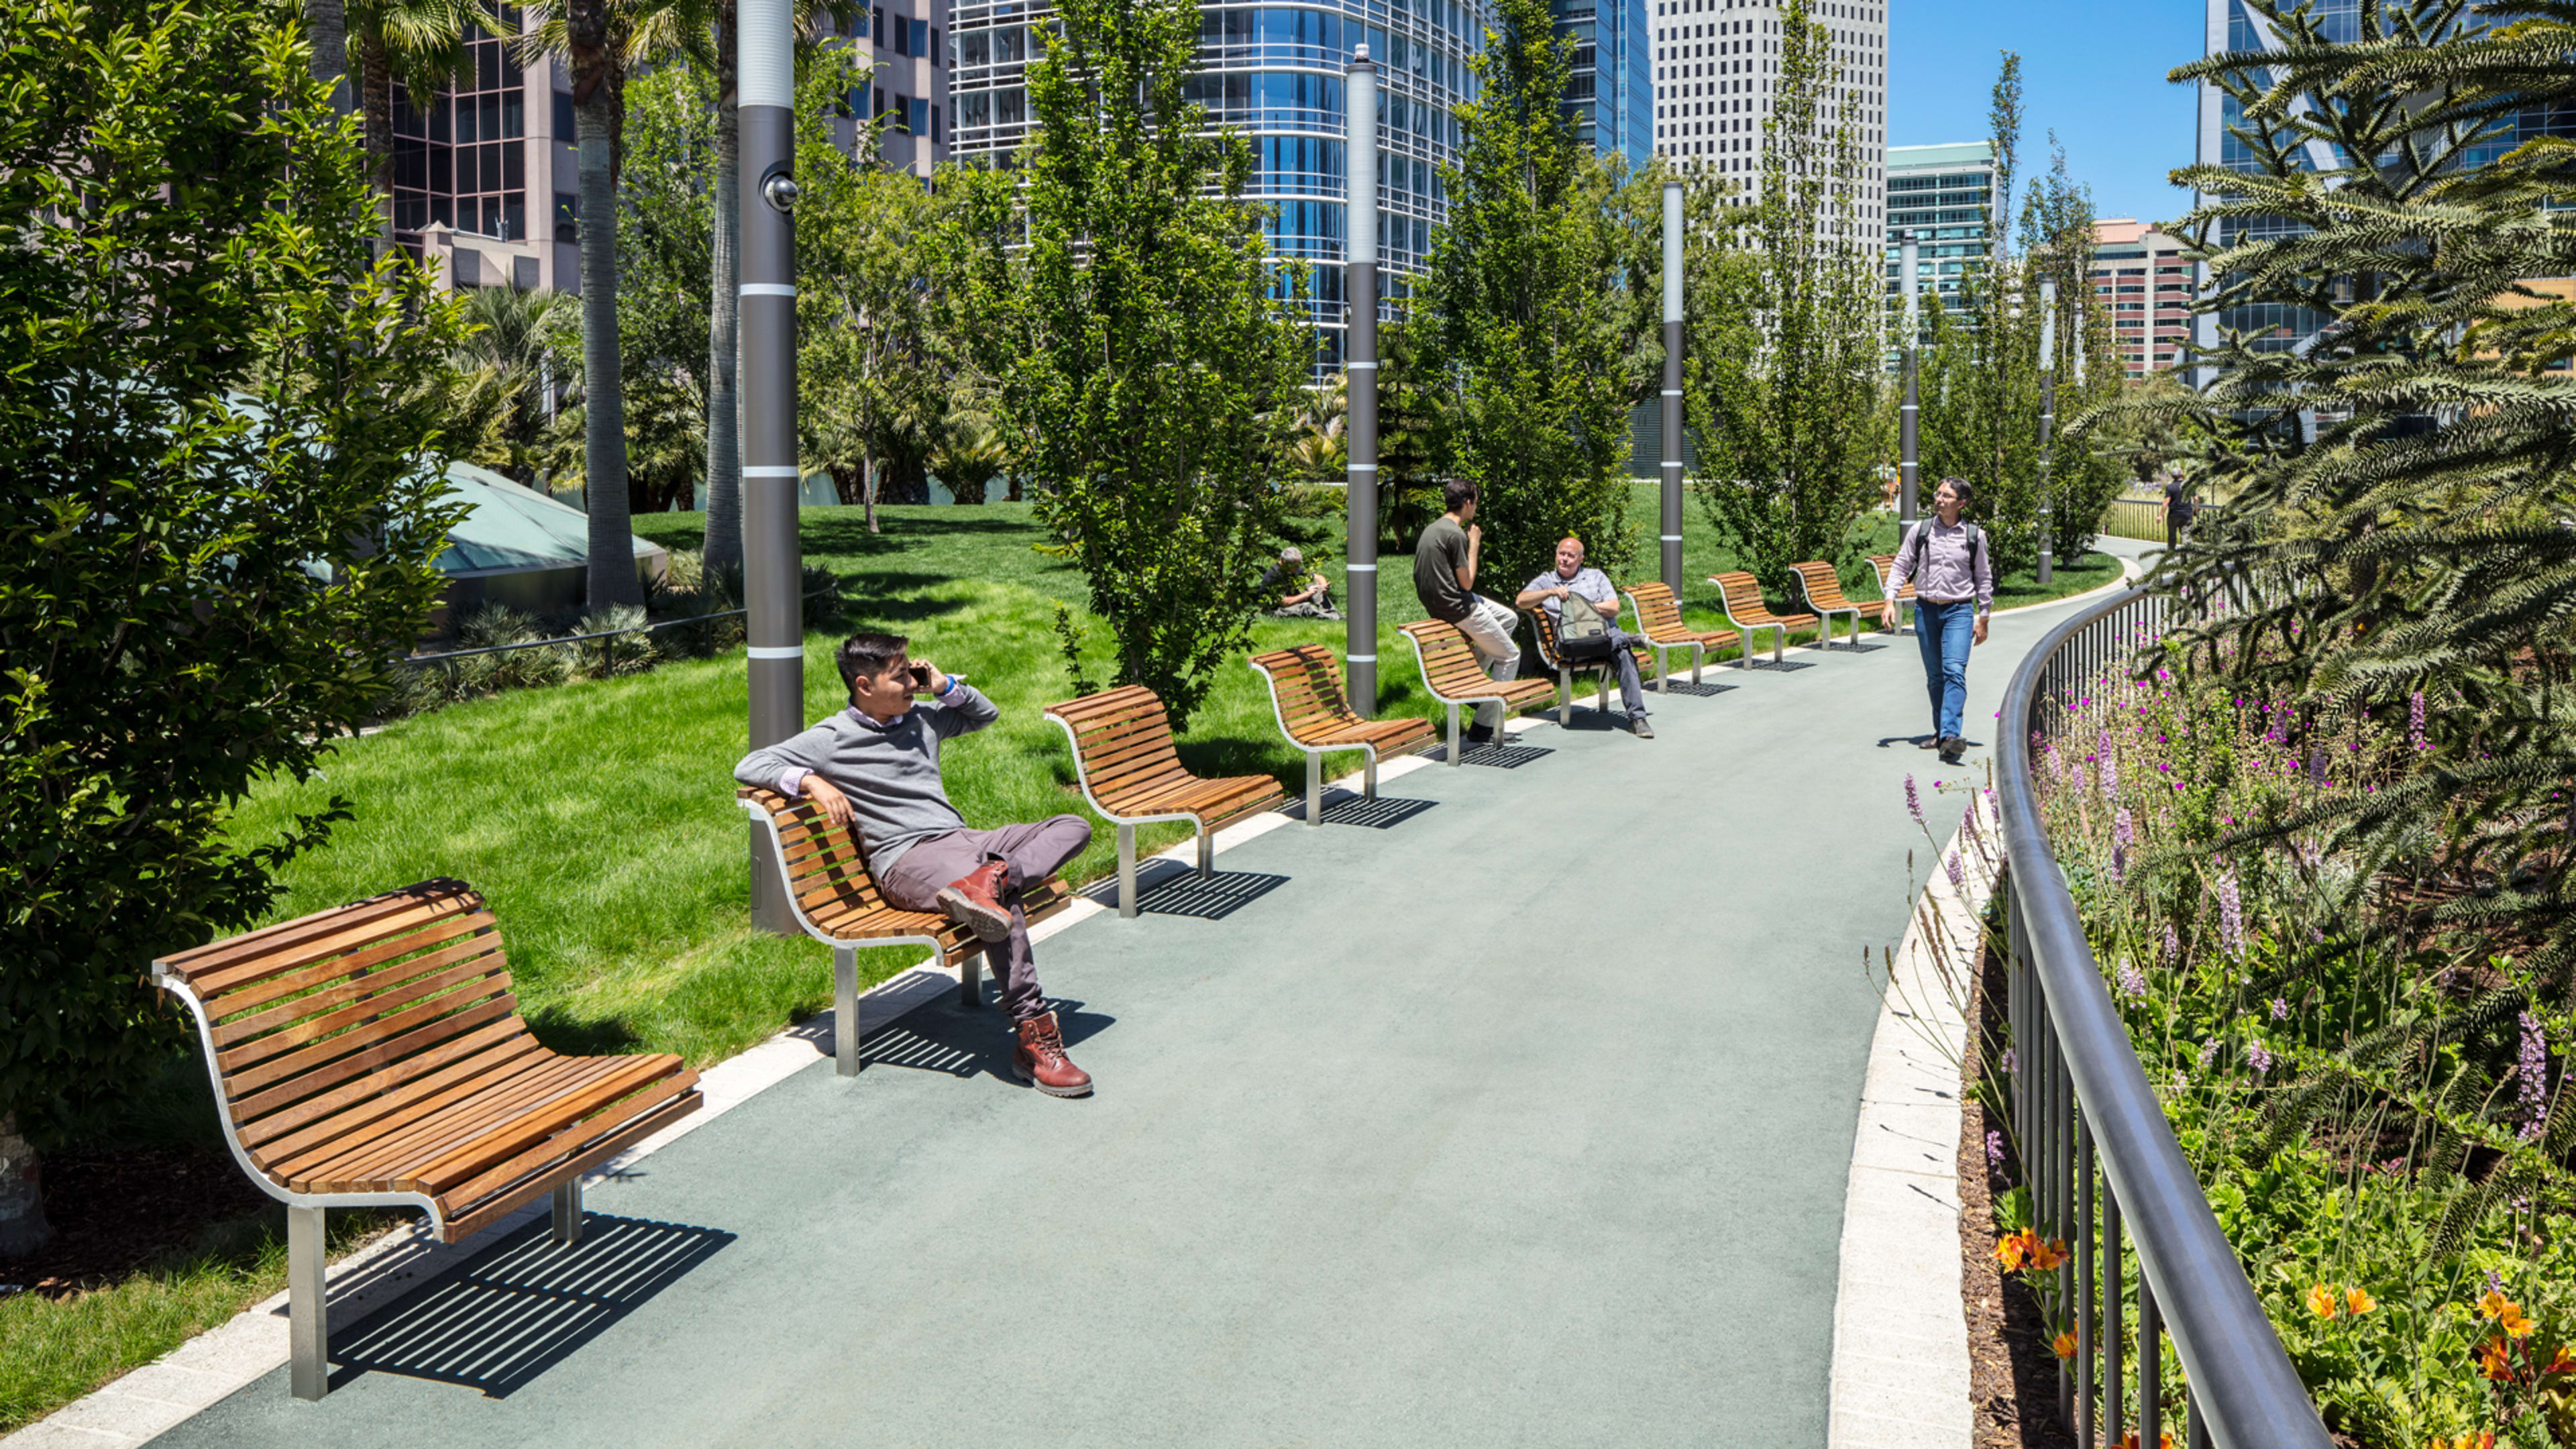 A first look at San Francisco’s sensational new elevated park